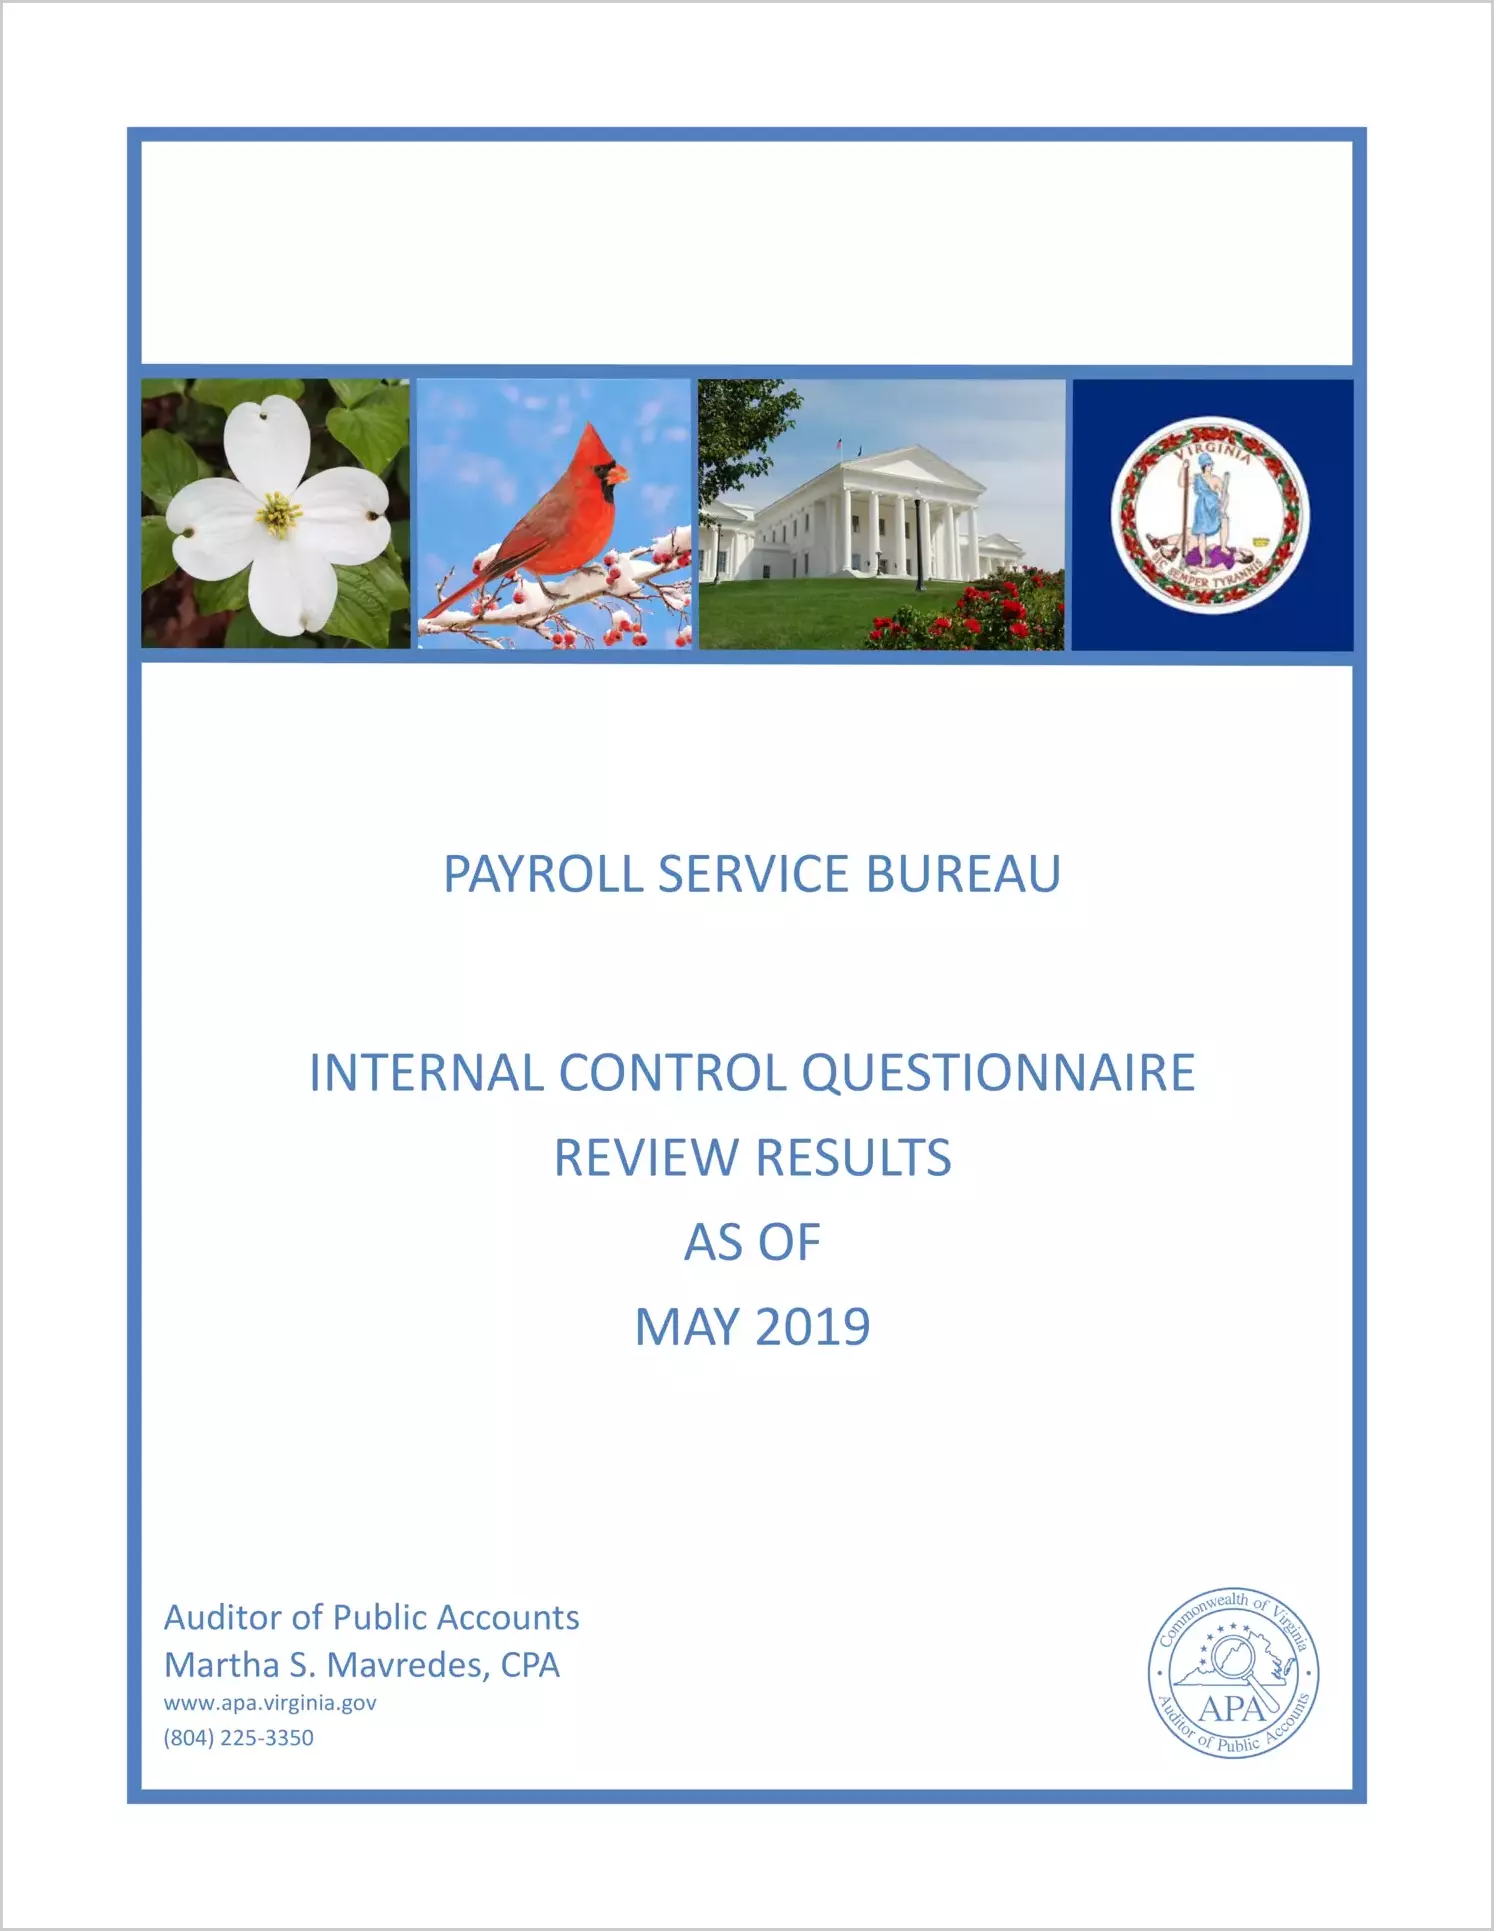 Payroll Service Bureau Internal Control Questionnaire Review Results as of May 2019